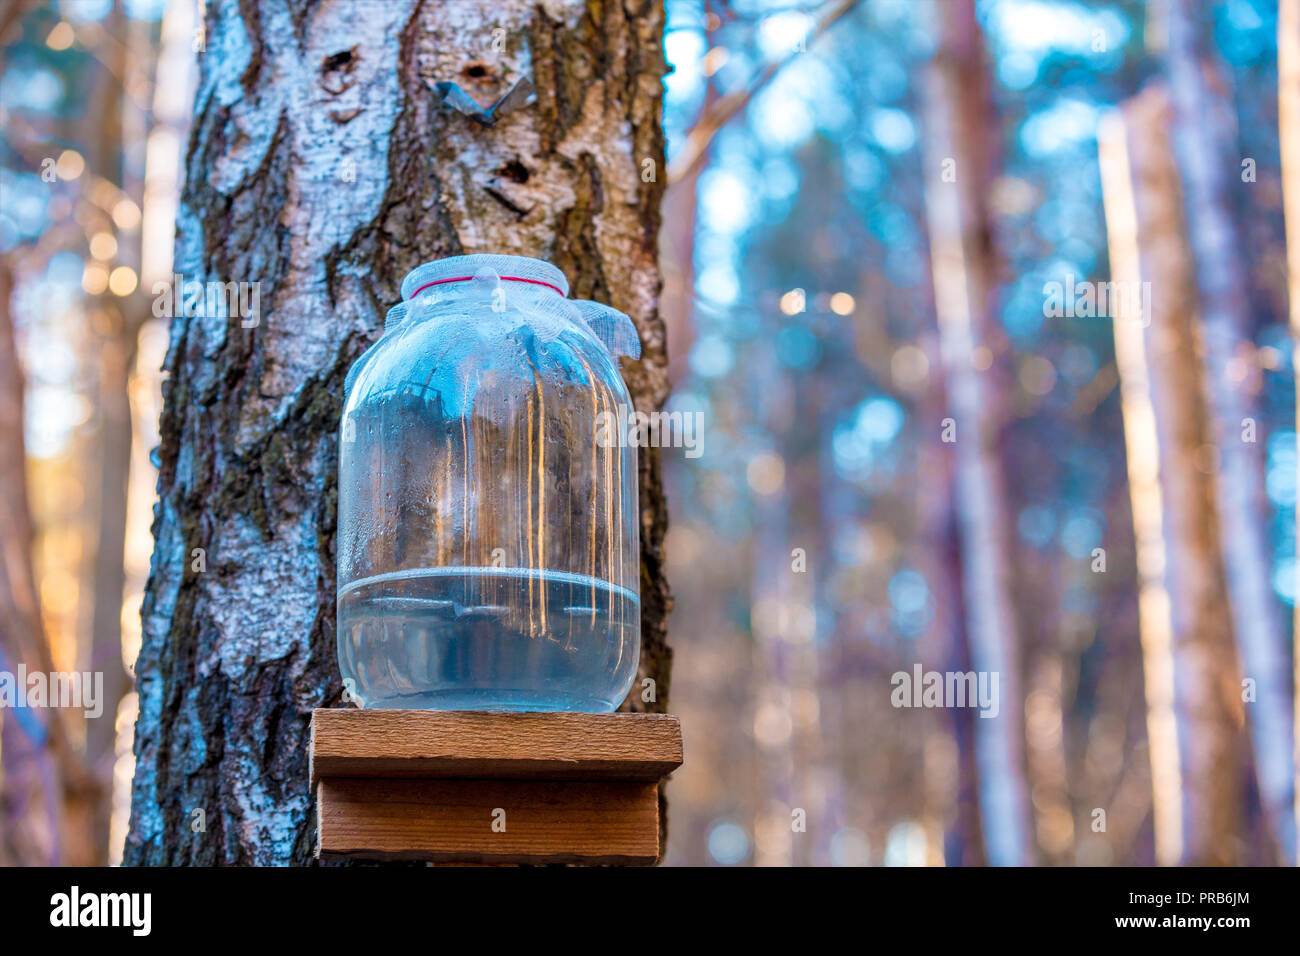 Production of birch sap in the glass jar in the forest. Springtime Stock Photo